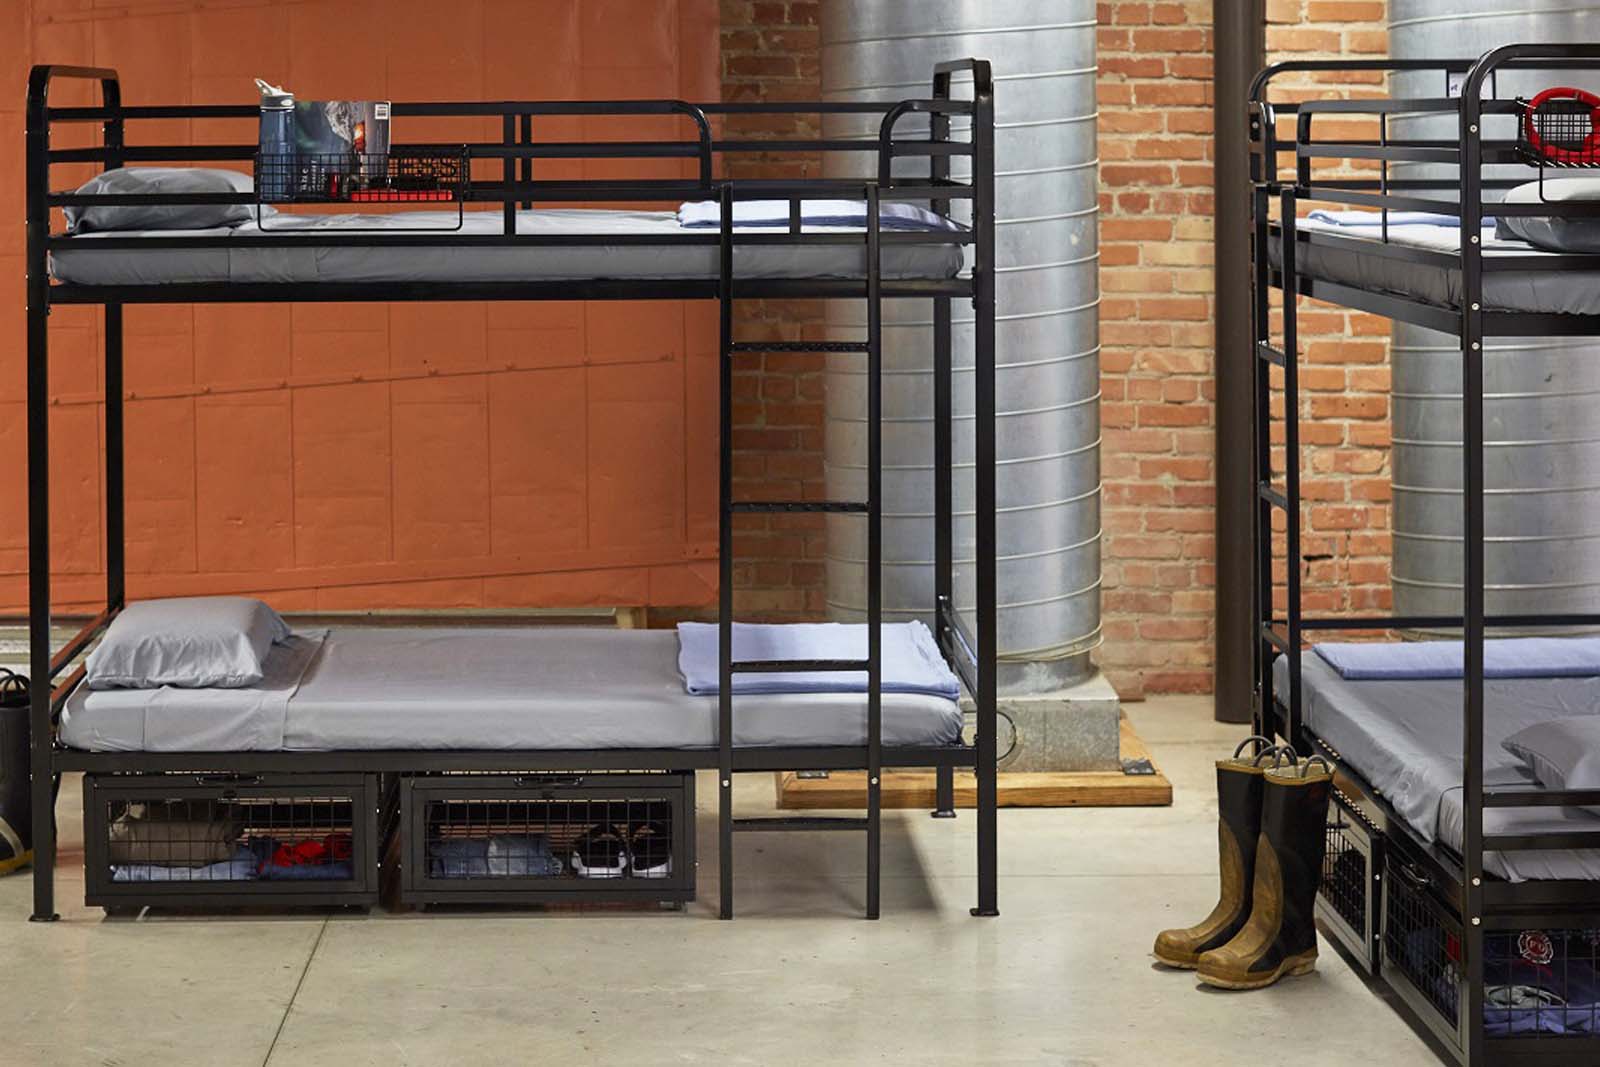 Government Use Bunk Beds and Mattresses